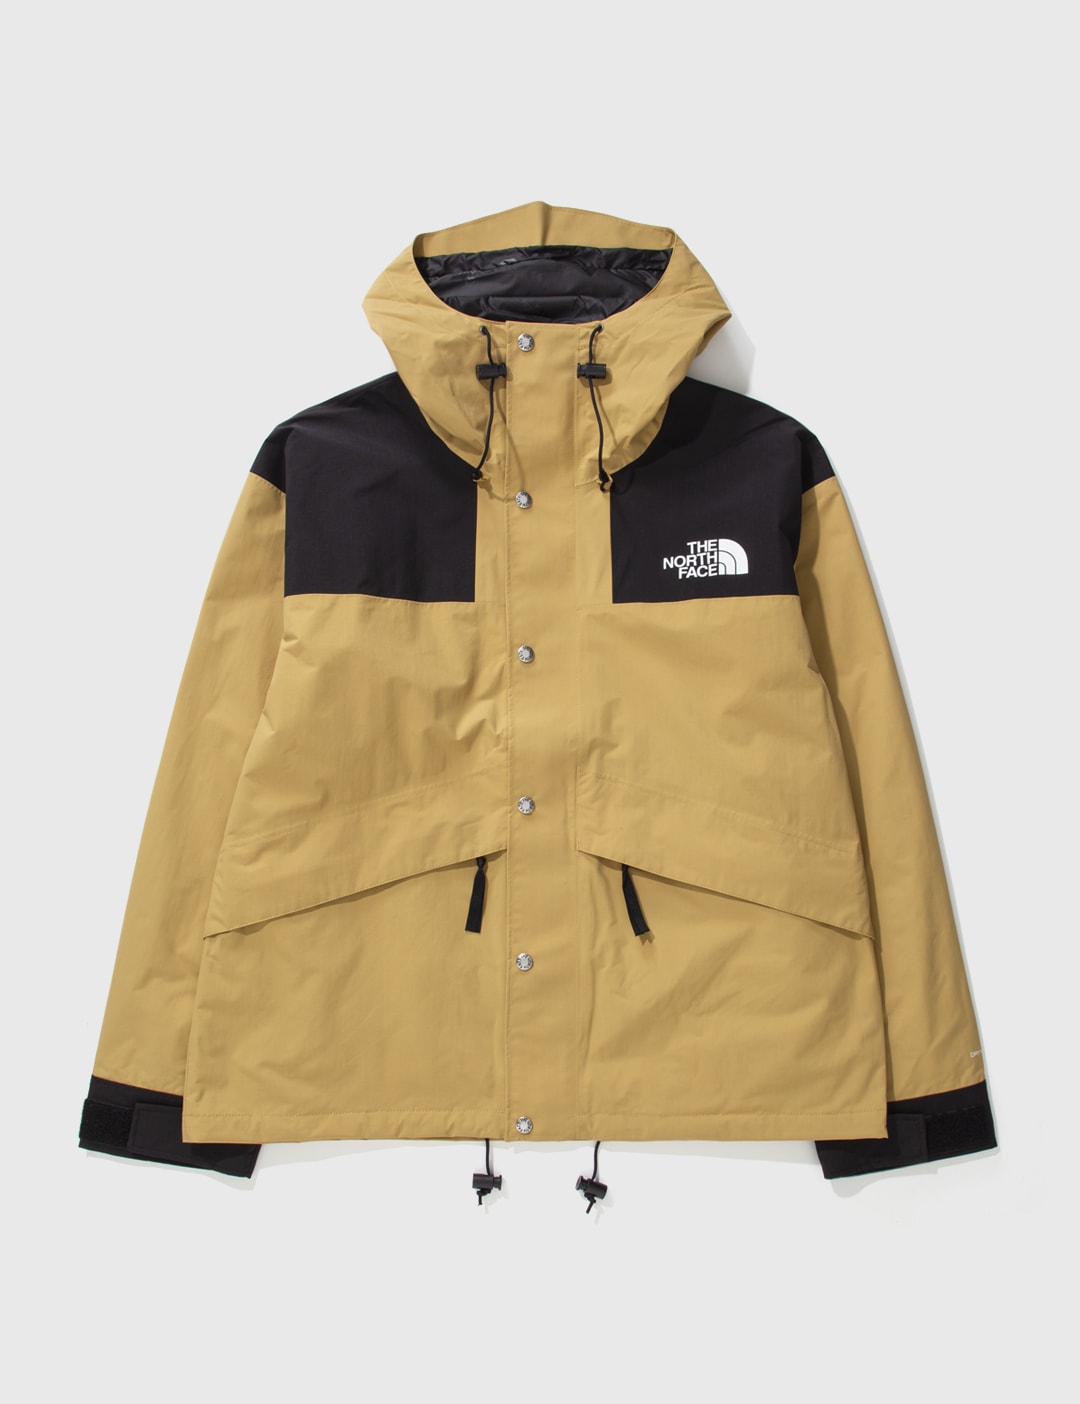 The North Face - Retro '86 Dryvent Mountain Jacket | HBX - Globally ...